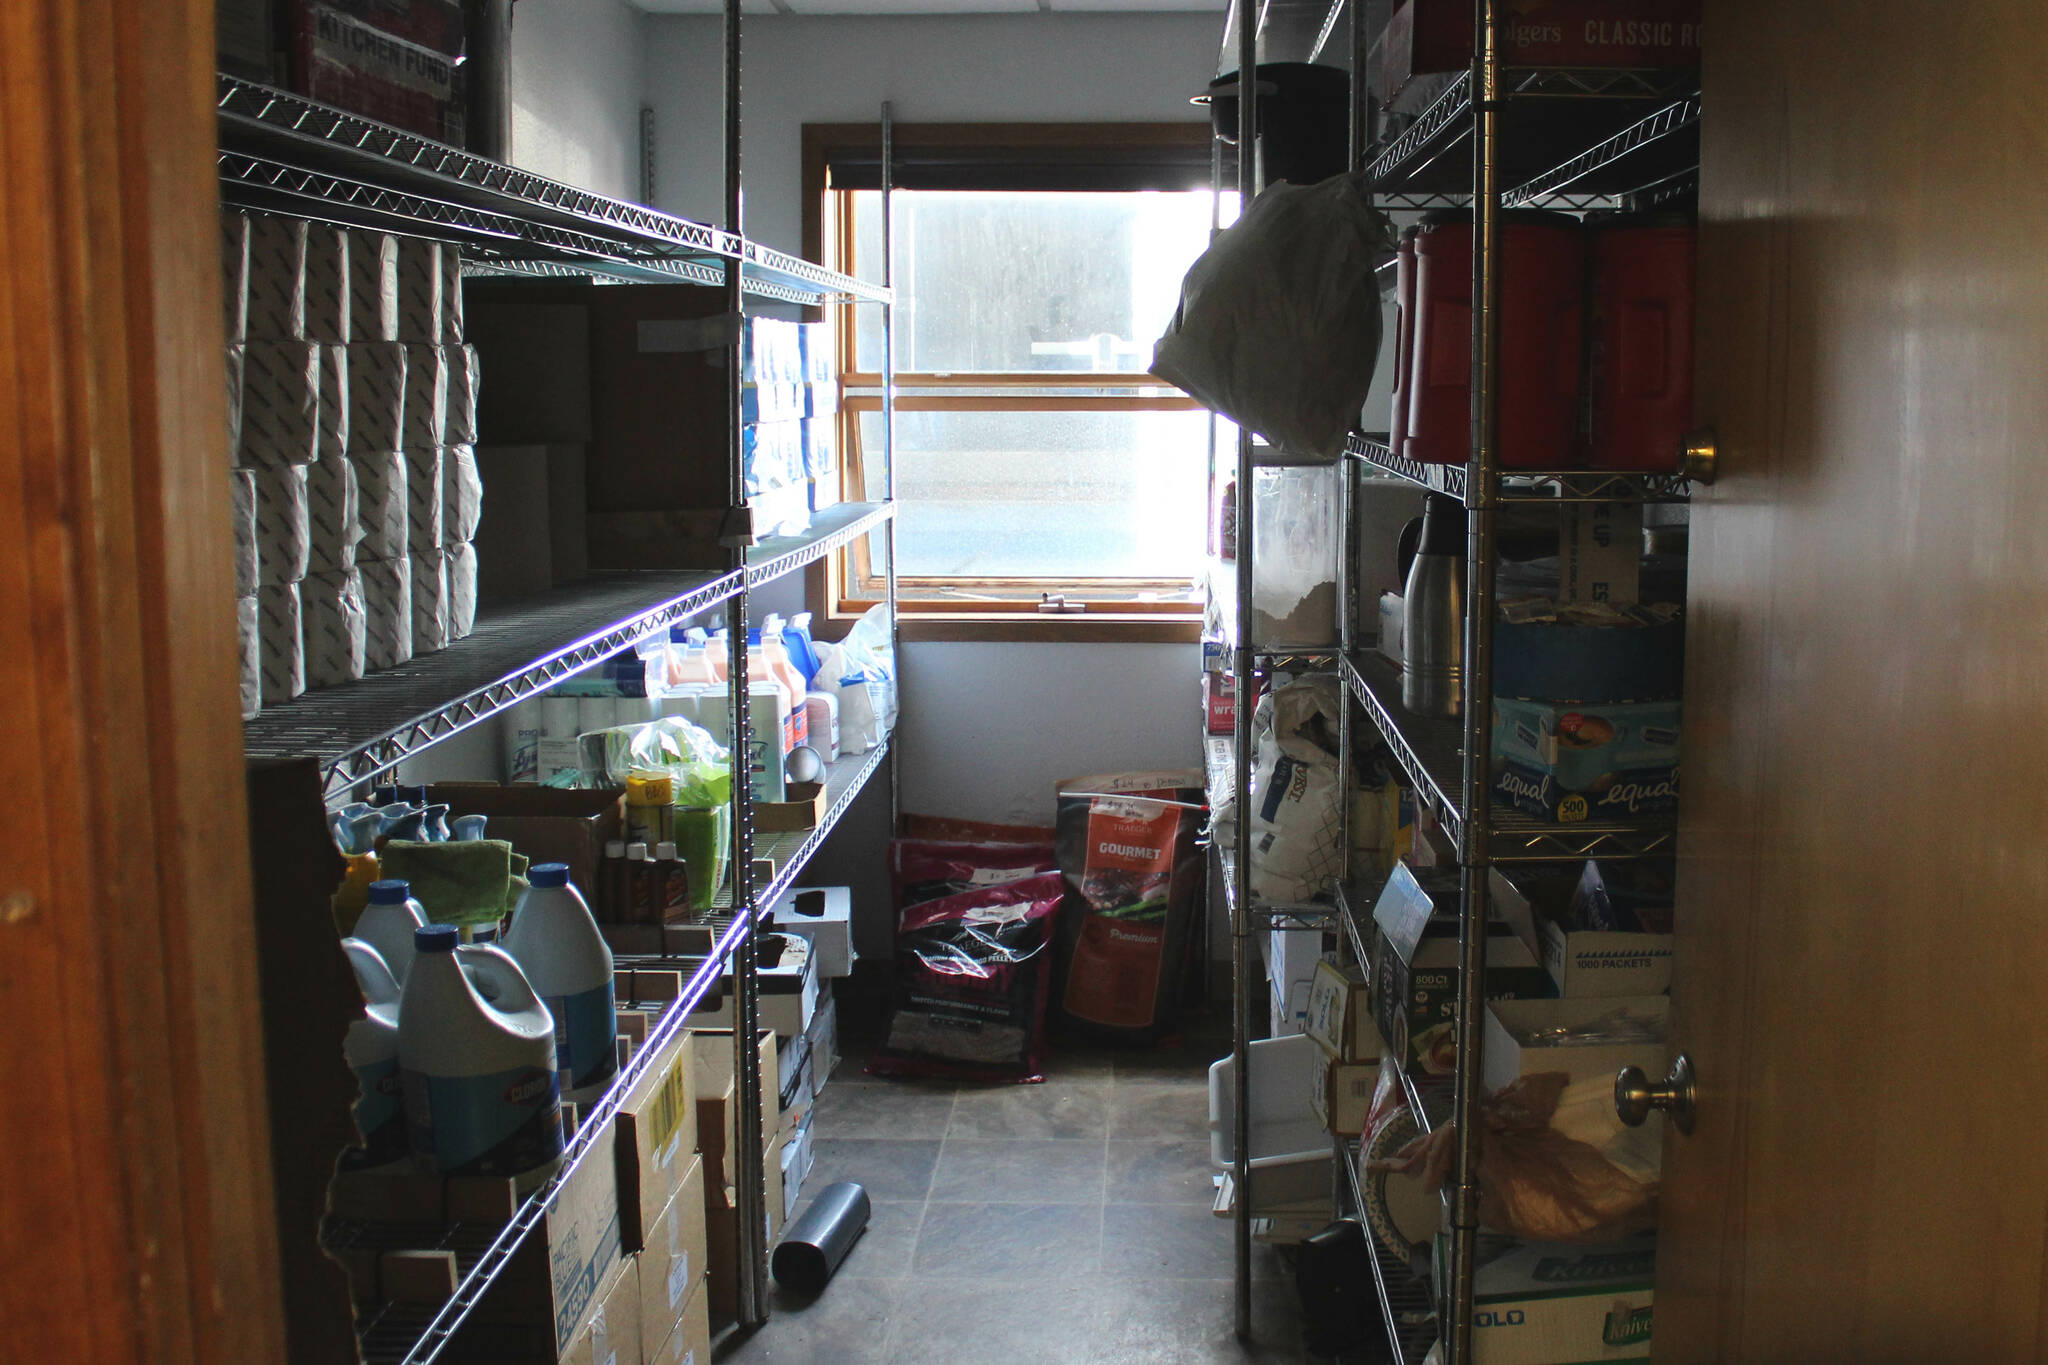 Fire station supplies are stored in a former administrative offices at Central Emergency Services Station 1 on Tuesday, July 26, 2022, in Soldotna, Alaska. (Ashlyn O’Hara/Peninsula Clarion)